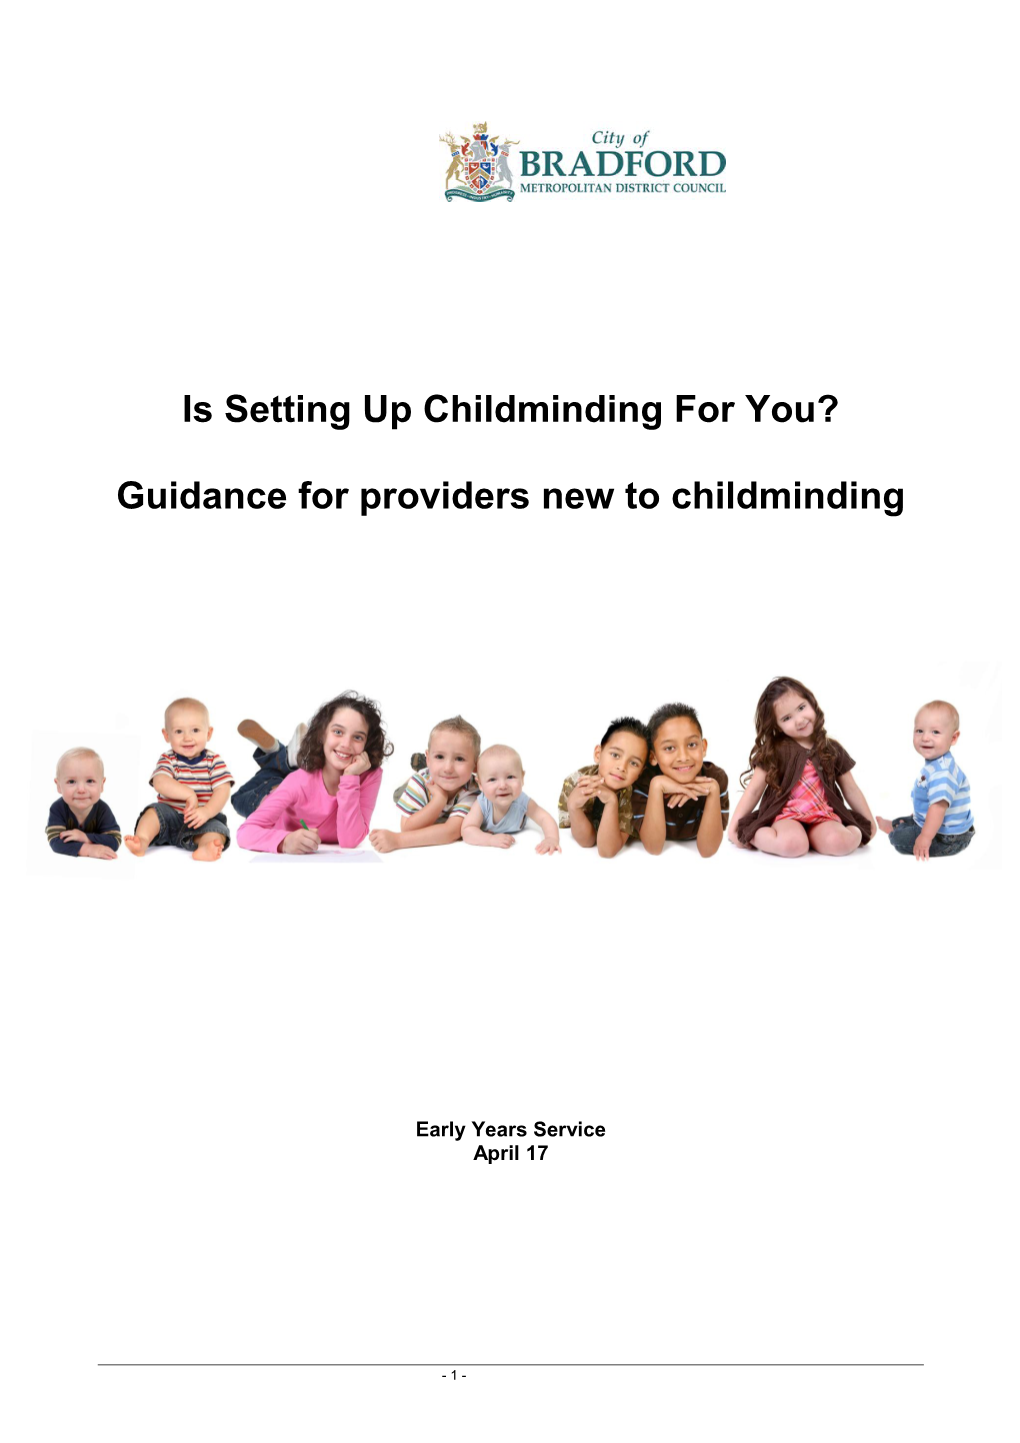 Is Setting up Childminding for You?